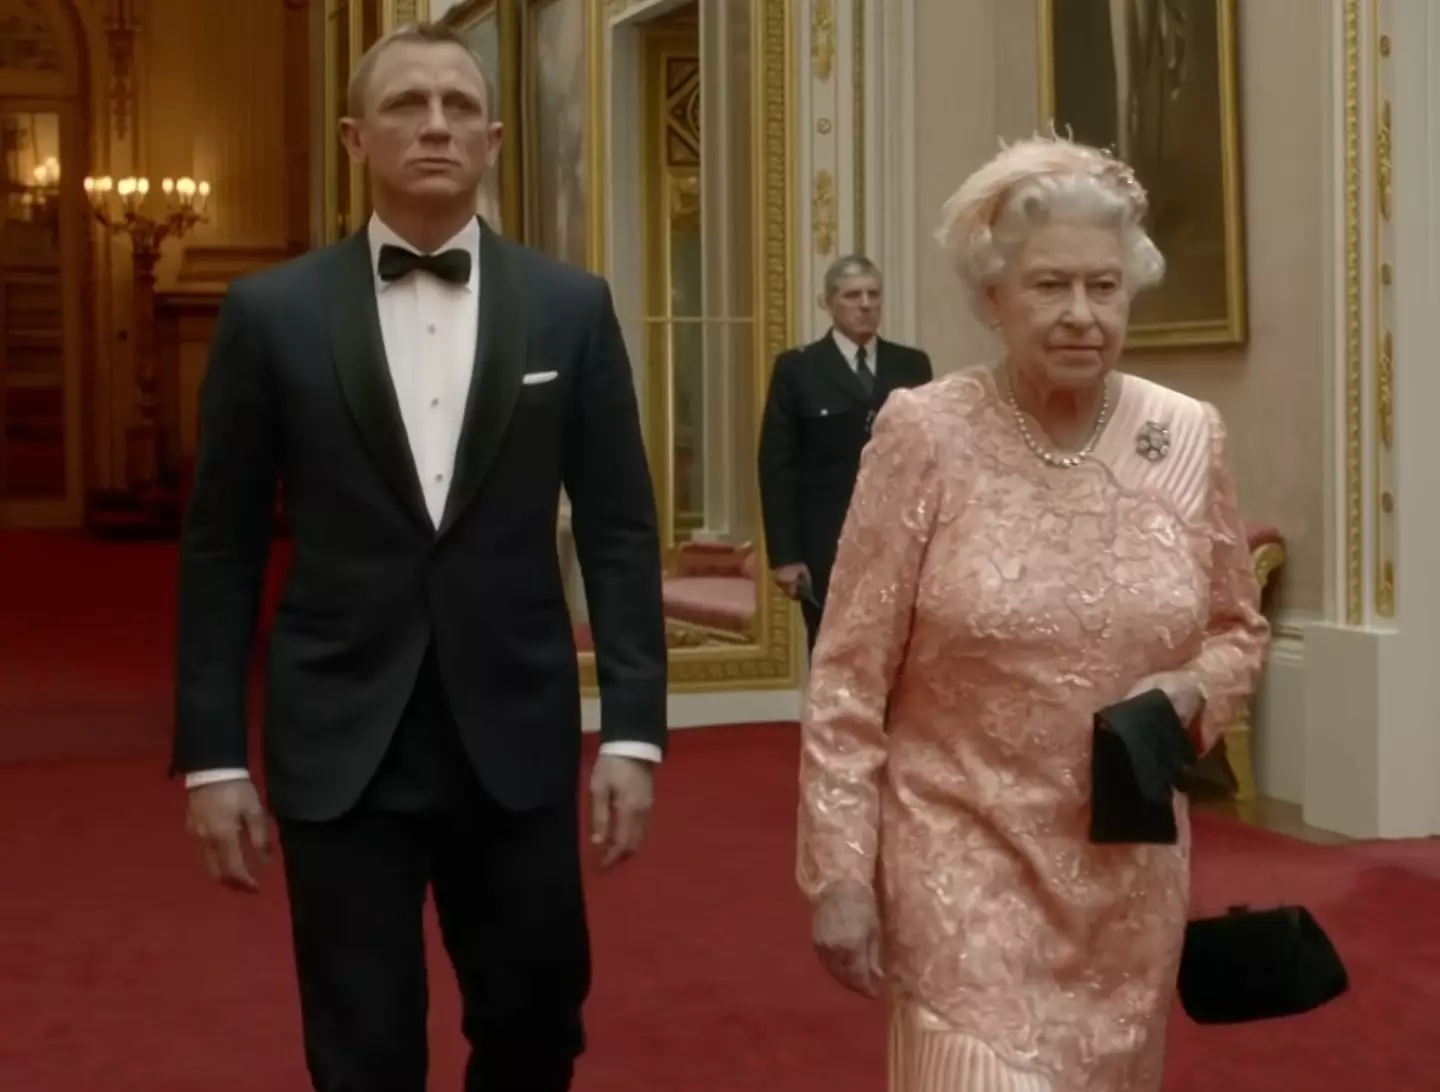 The Queen appeared alongside Daniel Craig's James Bond for the 2012 Olympics.